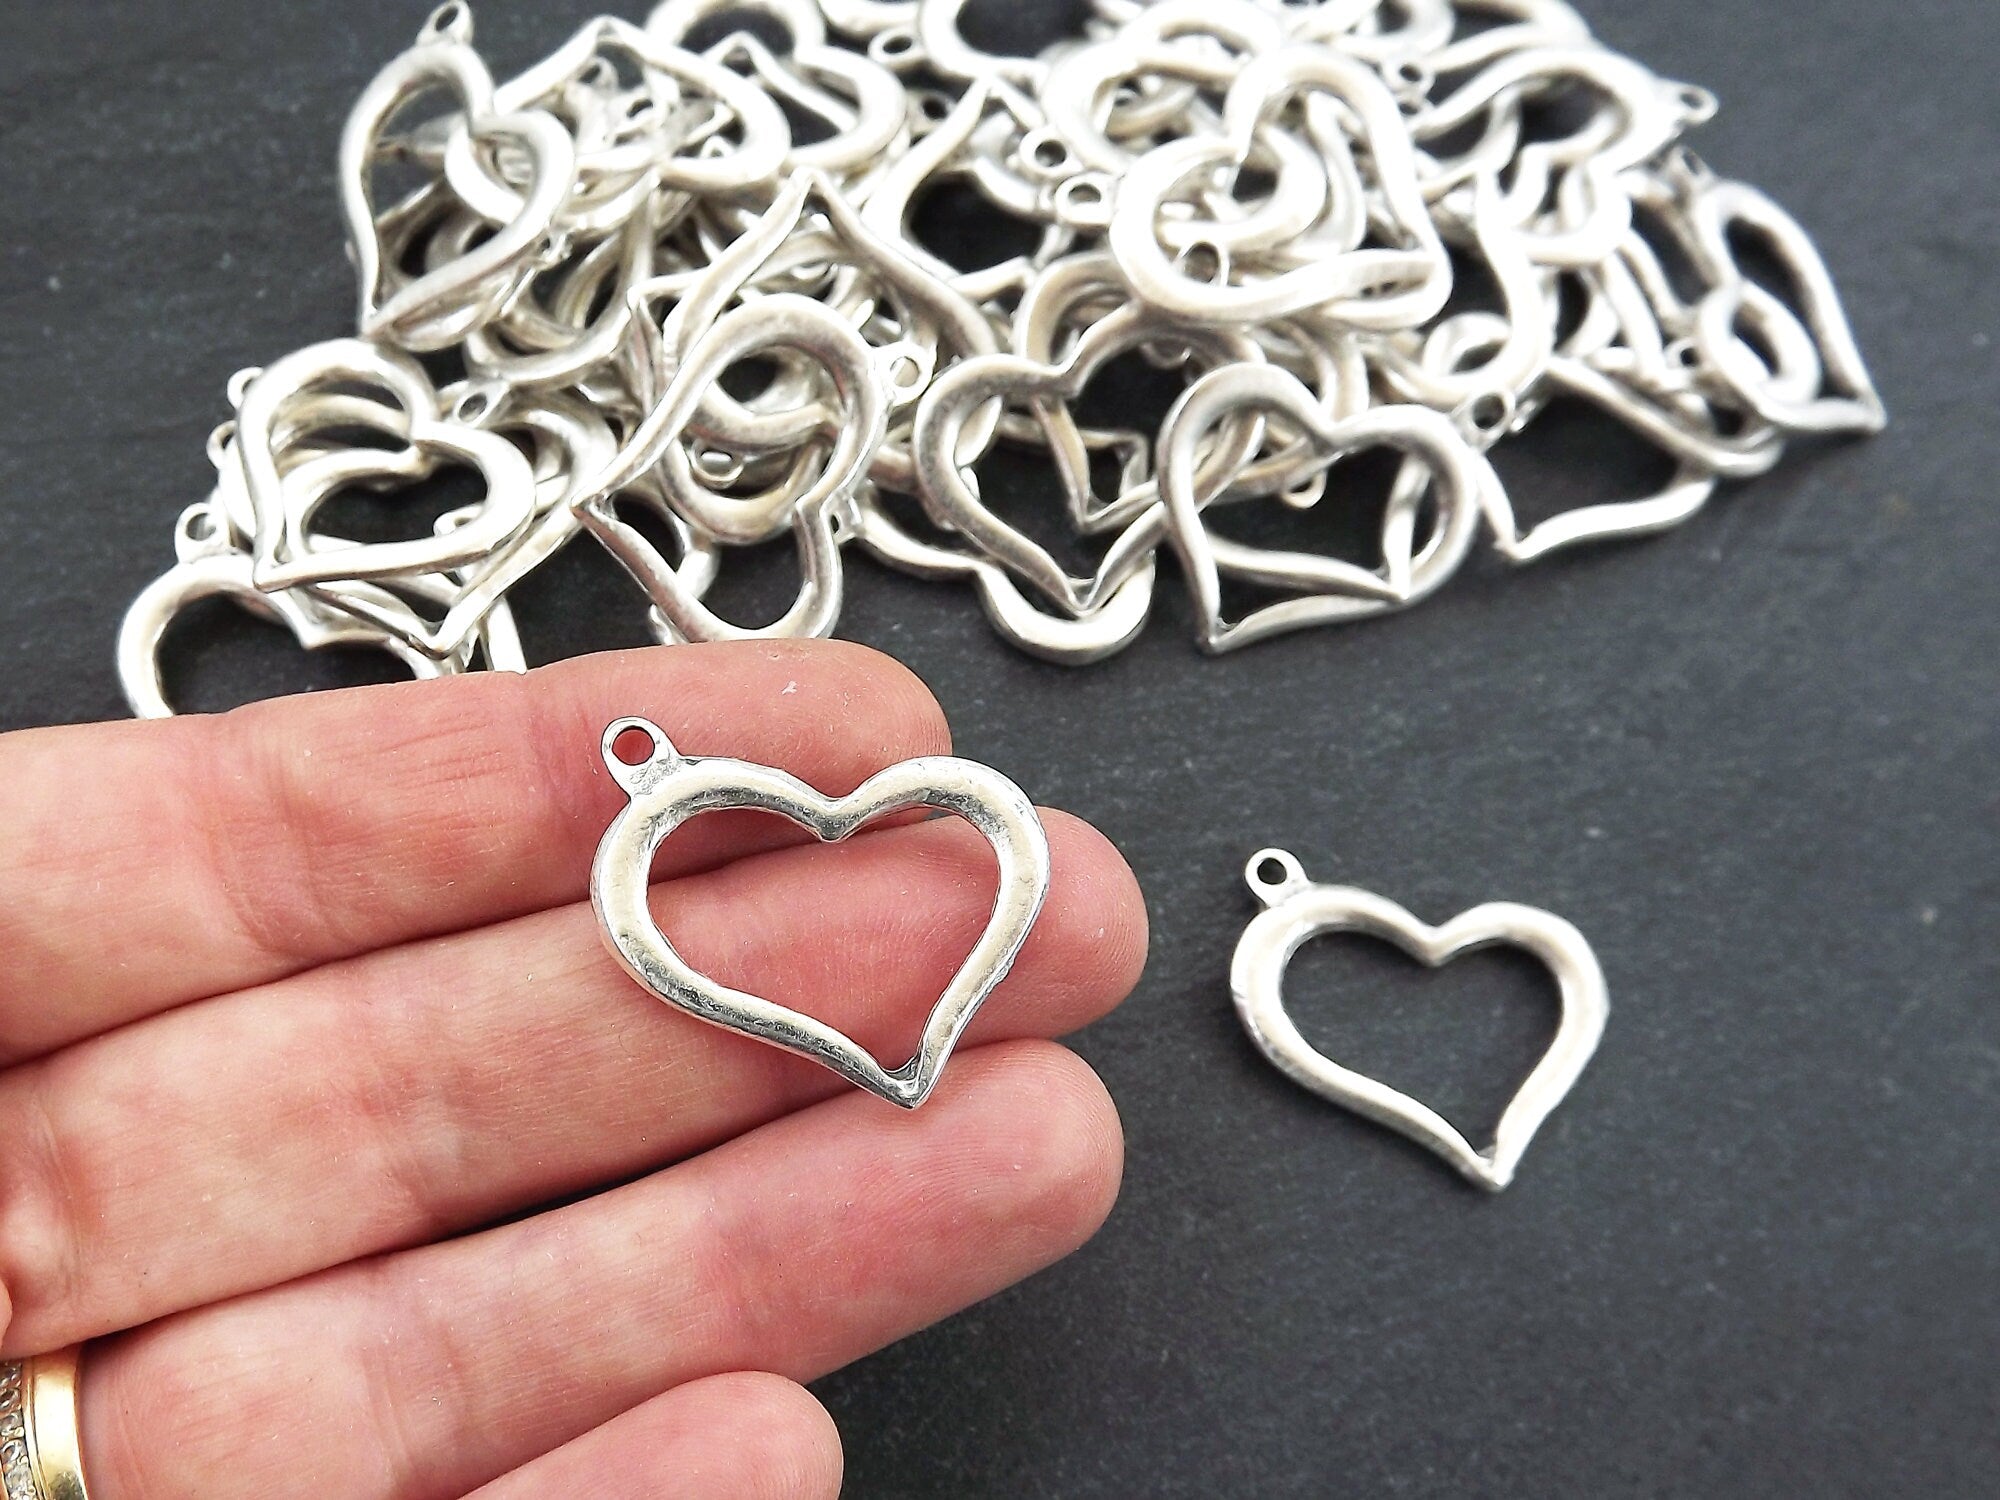  Open Heart Charm in Sterling Silver, Charms for